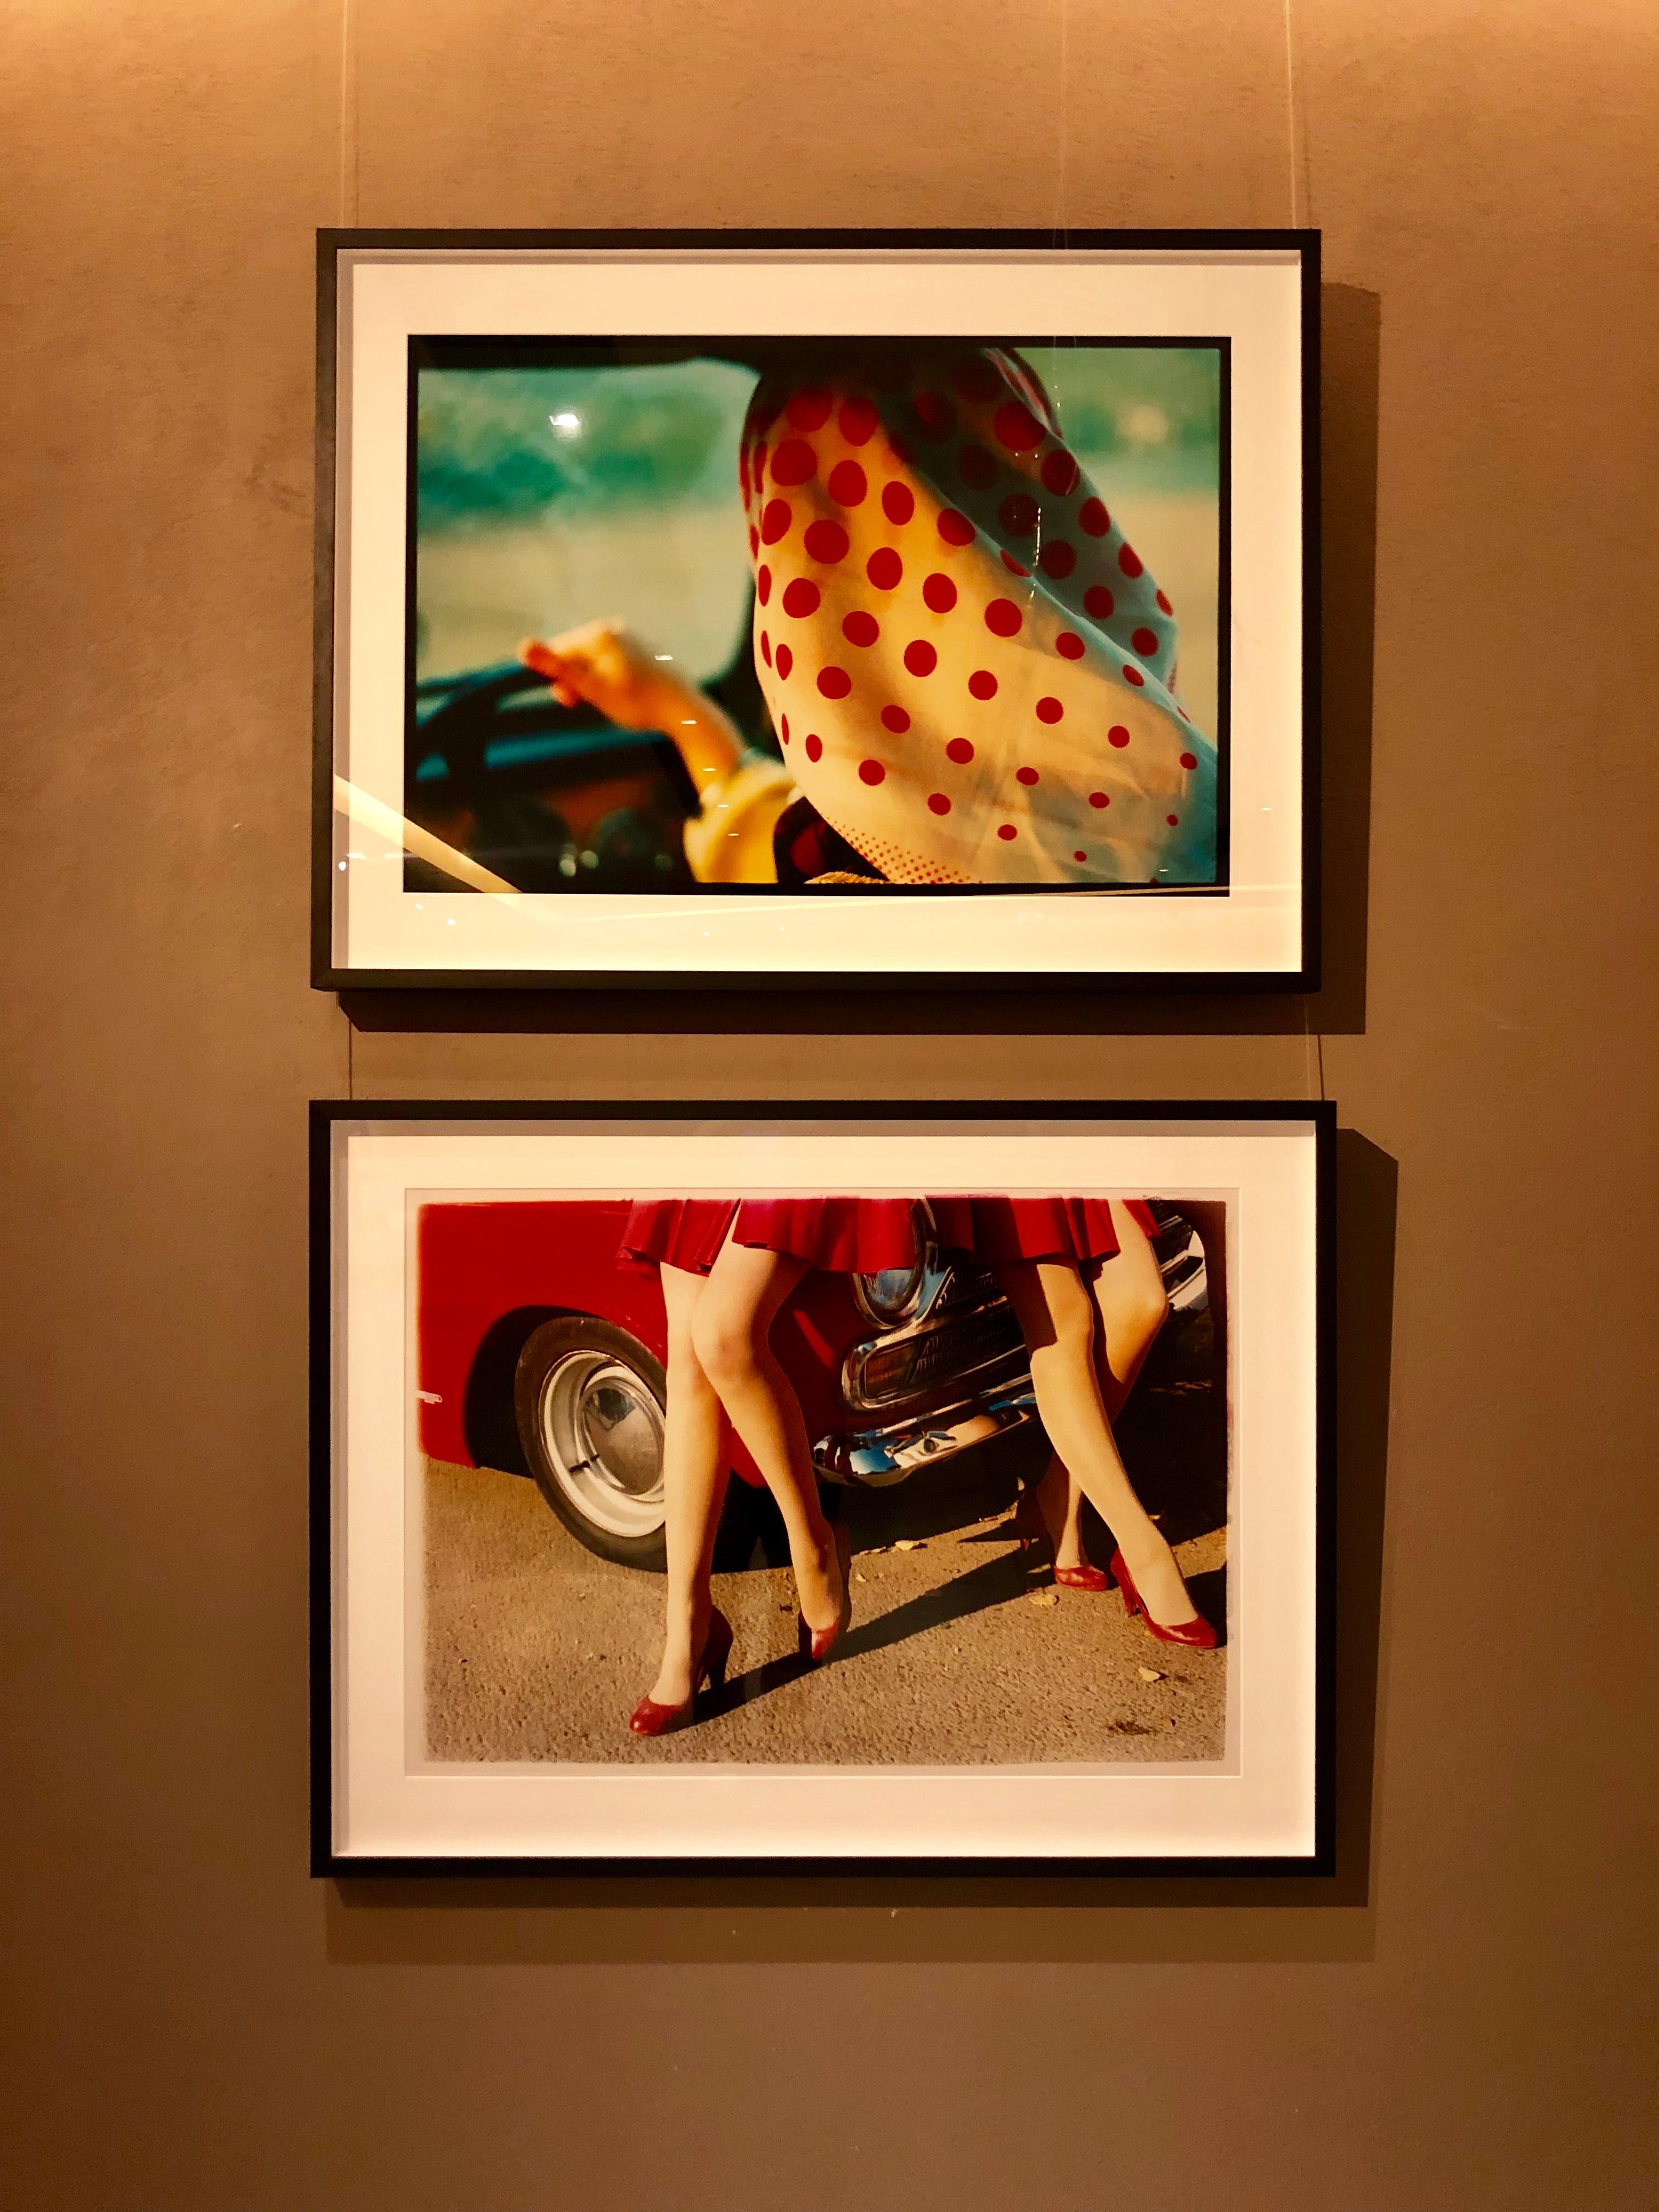 'Glamour Cabs', photography by Richard Heeps, taken at the glamorous retro event Goodwood Revival. It perfectly captures elegant feminine sophistication with a vintage vibe, a nod to the film Carry on Cabbie.
From Richard Heeps Man's Ruin, this